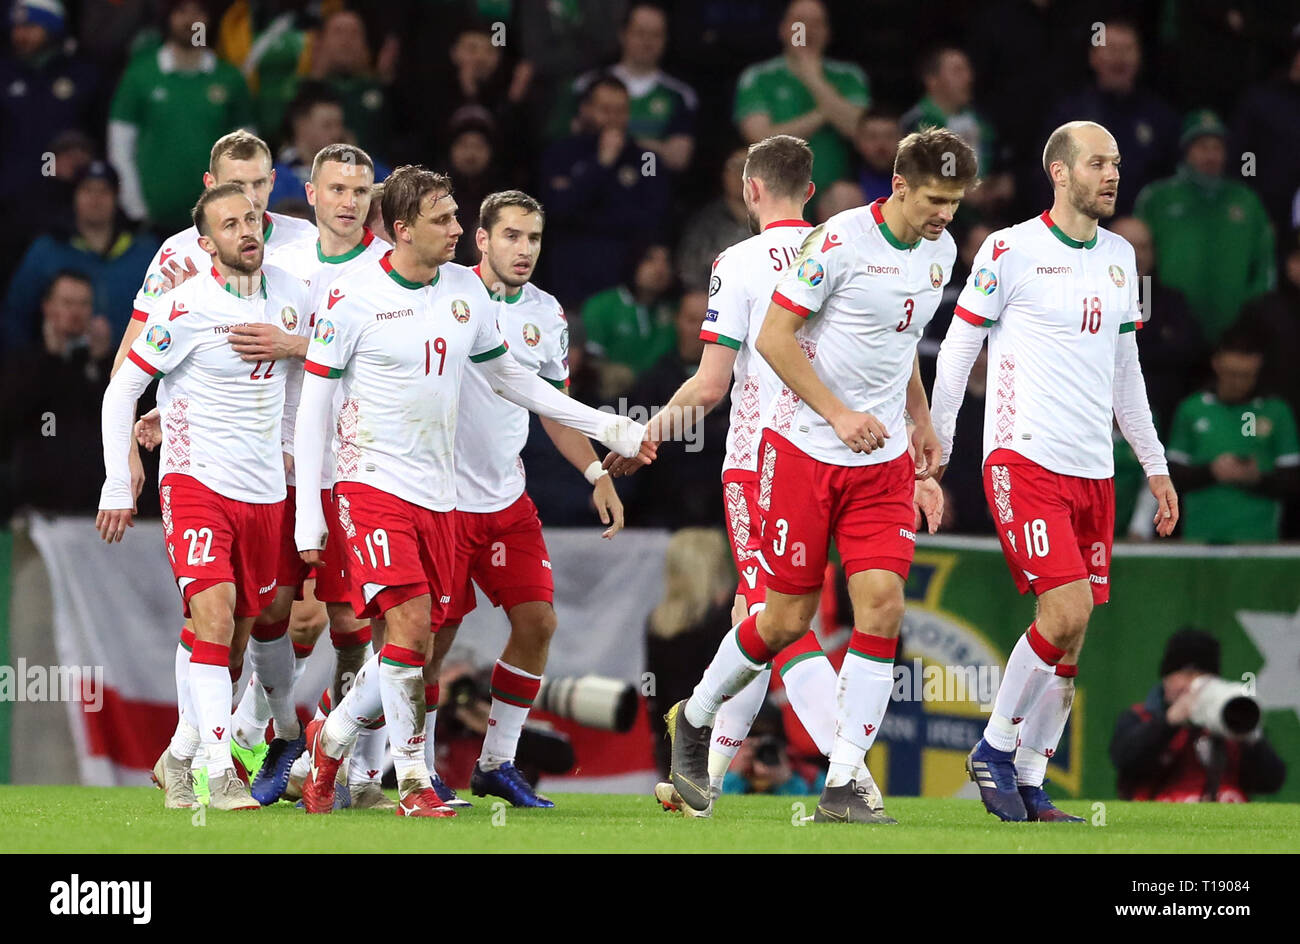 Belarus' Ihar Stasevich (far left) celebrates scoring his side's first goal of the game with team-mates during the UEFA Euro 2020 Qualifying, Group C match at Windsor Park, Belfast. Stock Photo